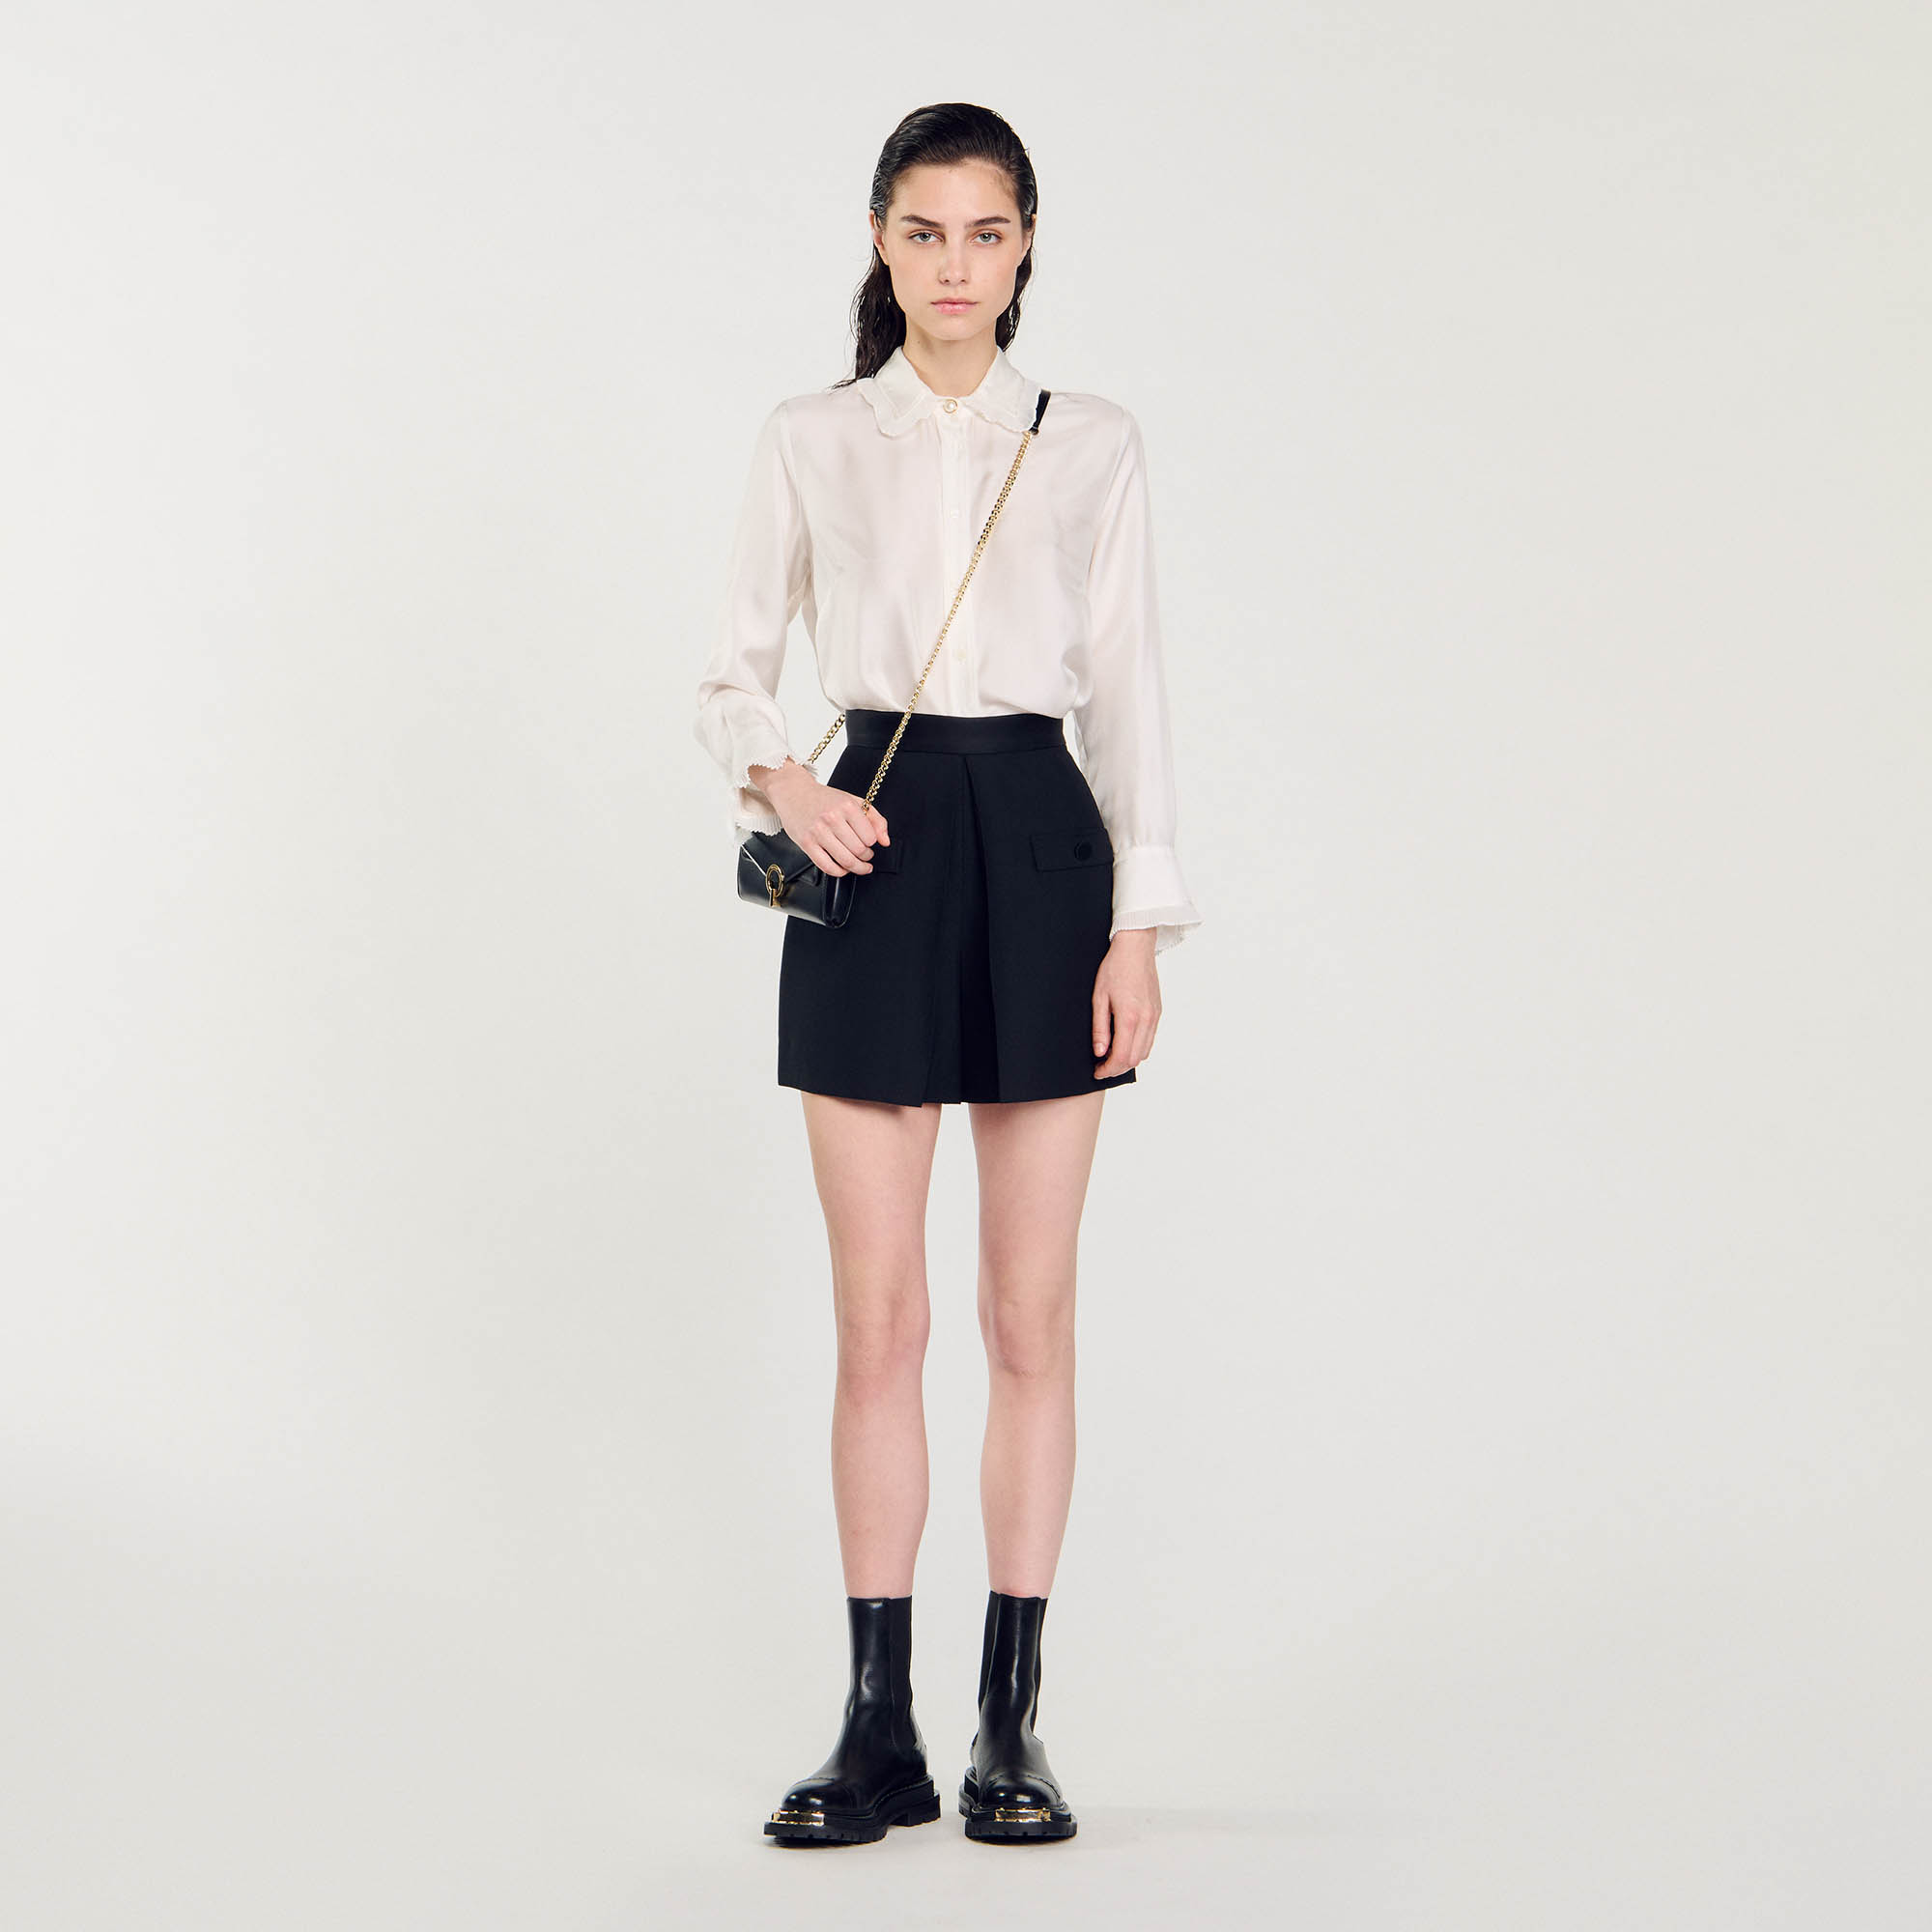 Sandro polyester Sandro women's shorts â€¢ Wool shorts â€¢ High-waisted with satin inserts â€¢ Trompe l'oeil pockets with covered buttons â€¢ Pleats front and back â€¢ Concealed zip fastening at the side â€¢ These shorts match the jacket